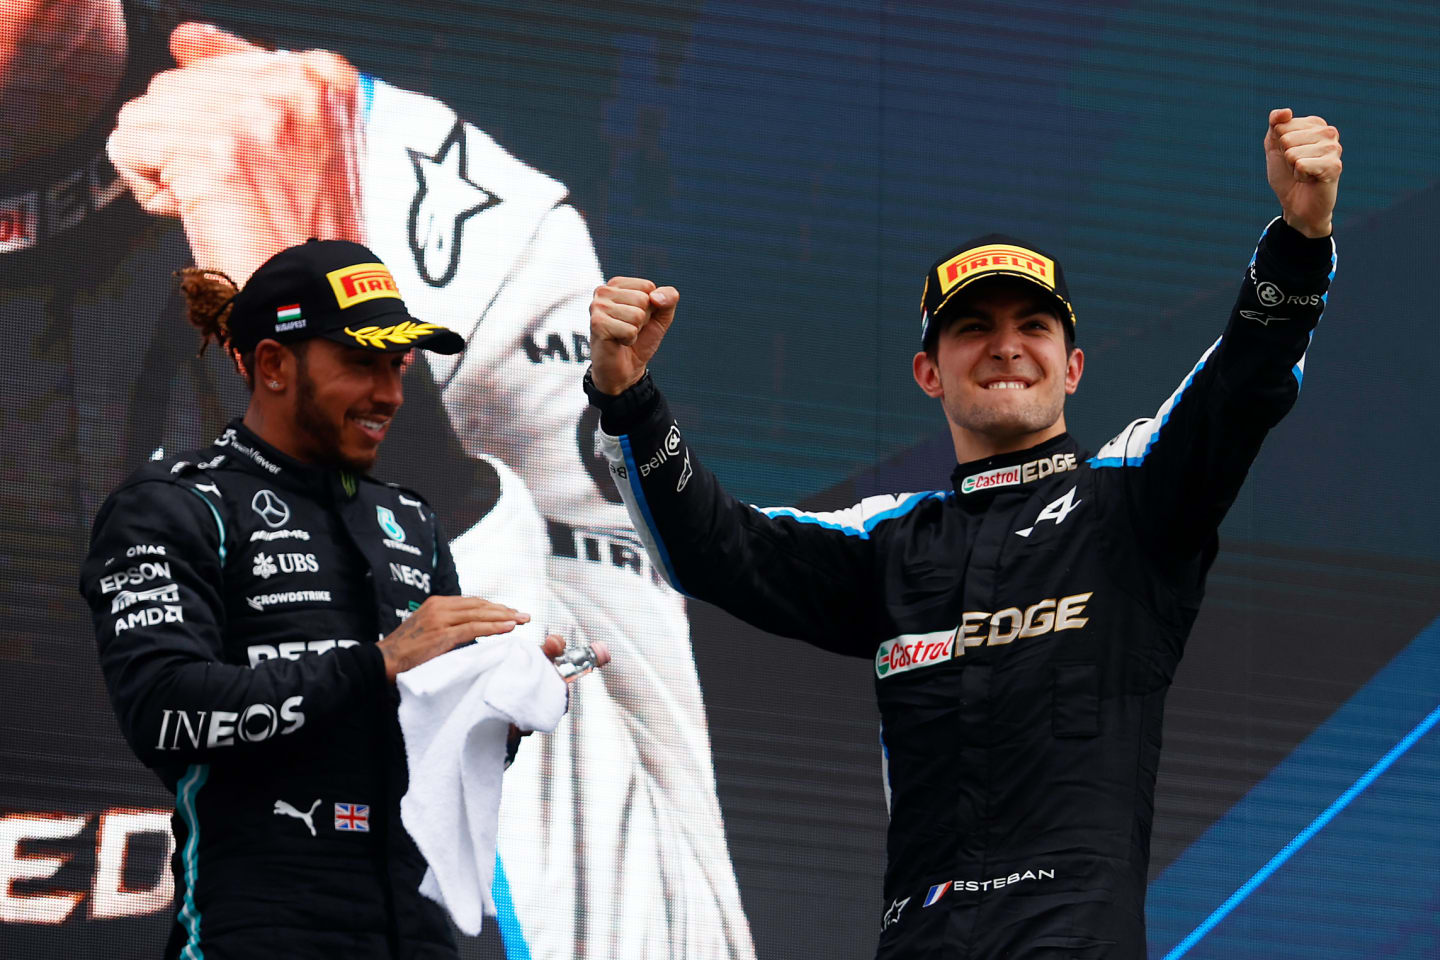 BUDAPEST, HUNGARY - AUGUST 01: Race winner Esteban Ocon of France and Alpine F1 Team celebrates on the podium next to third placed Lewis Hamilton of Great Britain and Mercedes GP during the F1 Grand Prix of Hungary at Hungaroring on August 01, 2021 in Budapest, Hungary. (Photo by Florion Goga - Pool/Getty Images)